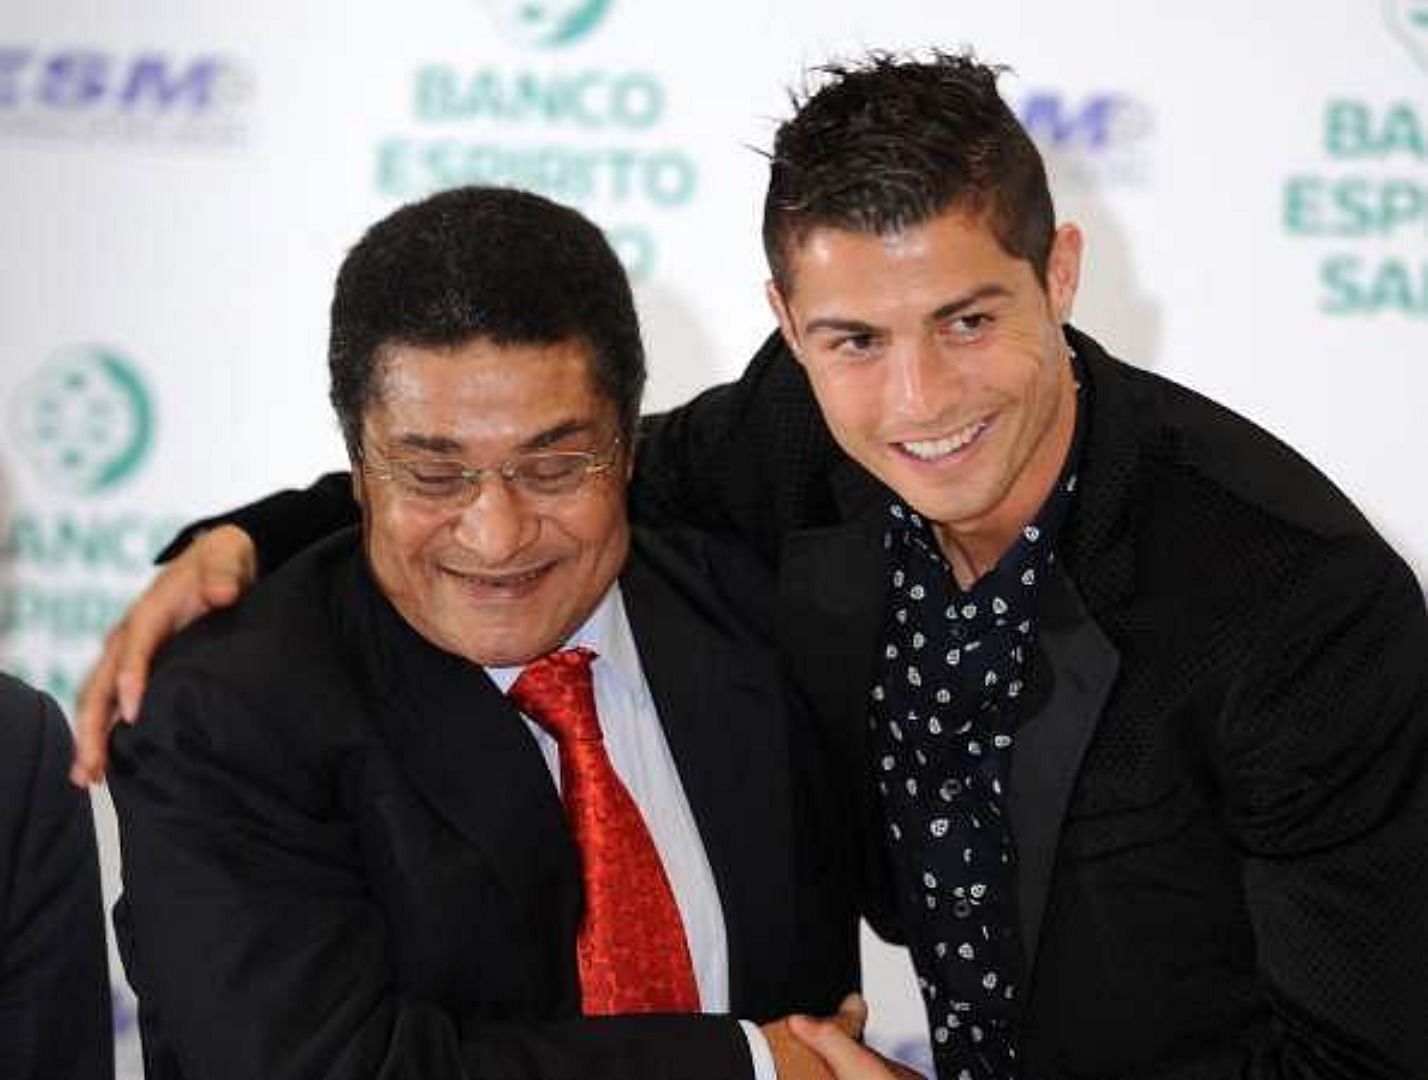 Ronaldo&#039;s and Eusebio&#039;s game have a lot of similarities.